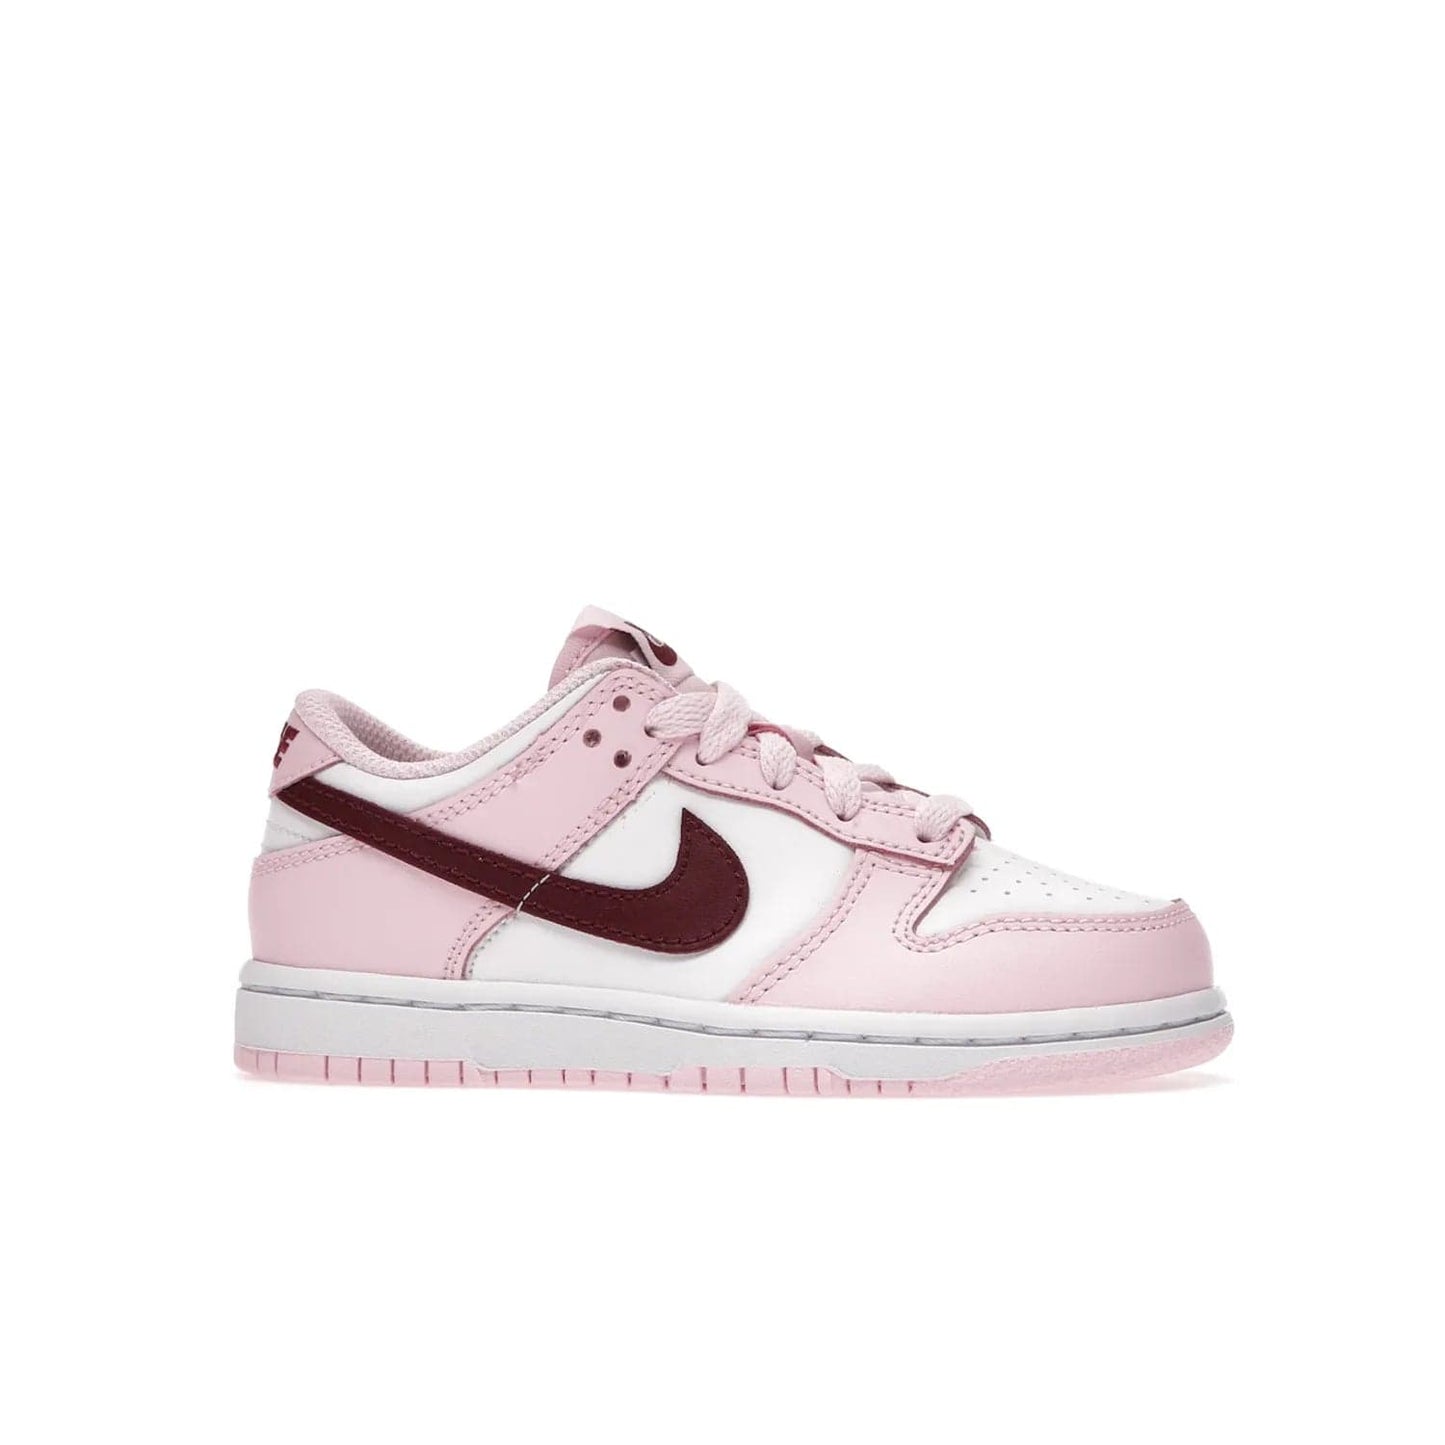 Nike Dunk Low Pink Red White (PS) - Image 2 - Only at www.BallersClubKickz.com - Introducing the Nike Dunk Low Pink Red White (PS), the perfect addition to your sneaker collection. A classic silhouette with modern vibrant colors, including a pink upper with red and white accents and a white midsole. Comfort and durability, perfect for any outfit. Limited edition, available June 22nd.